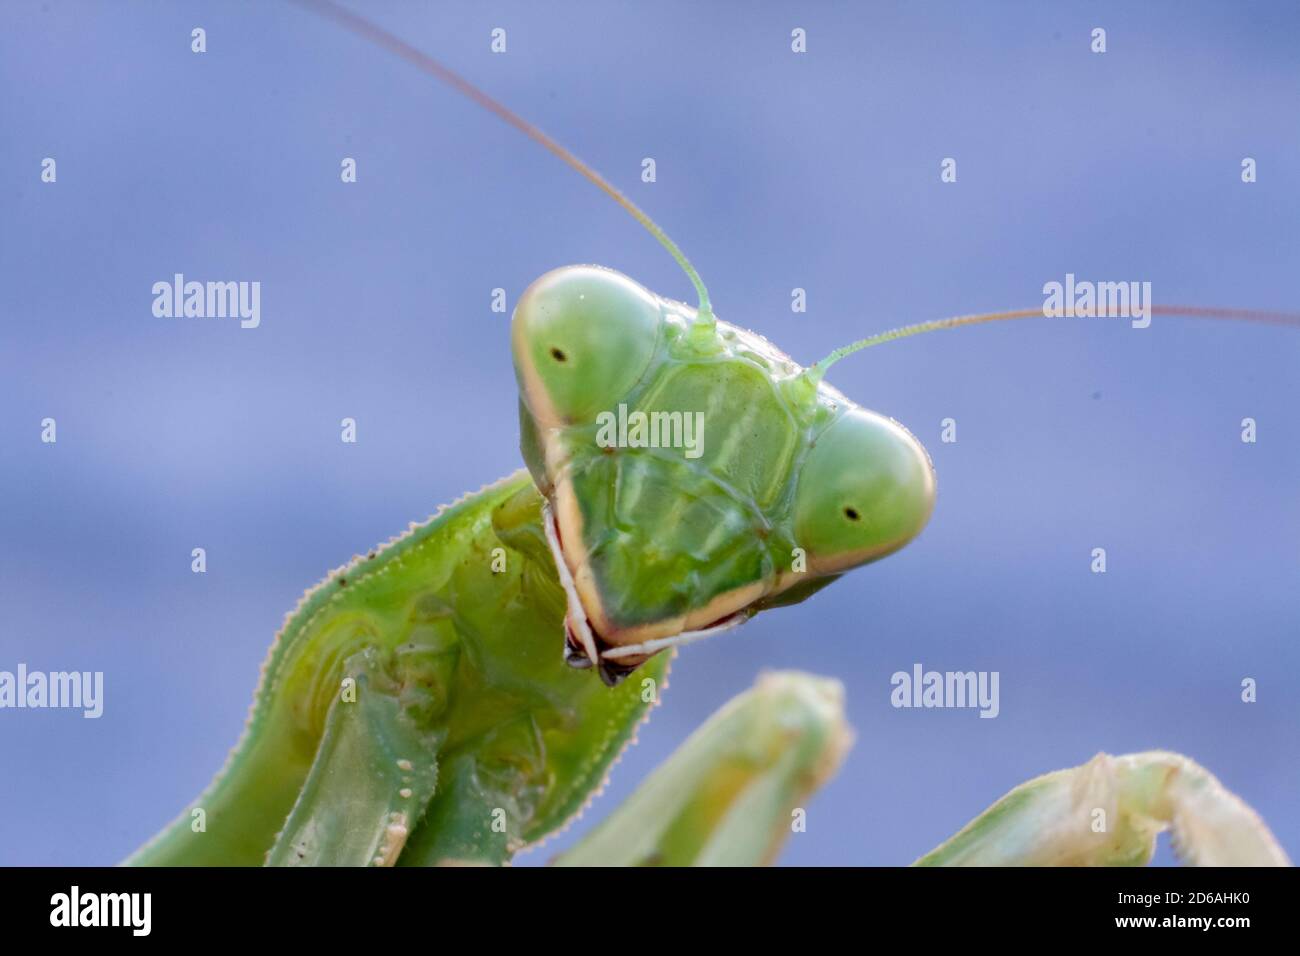 There is a female praying mantis shooted in a macro picture from the front of their face. Stock Photo